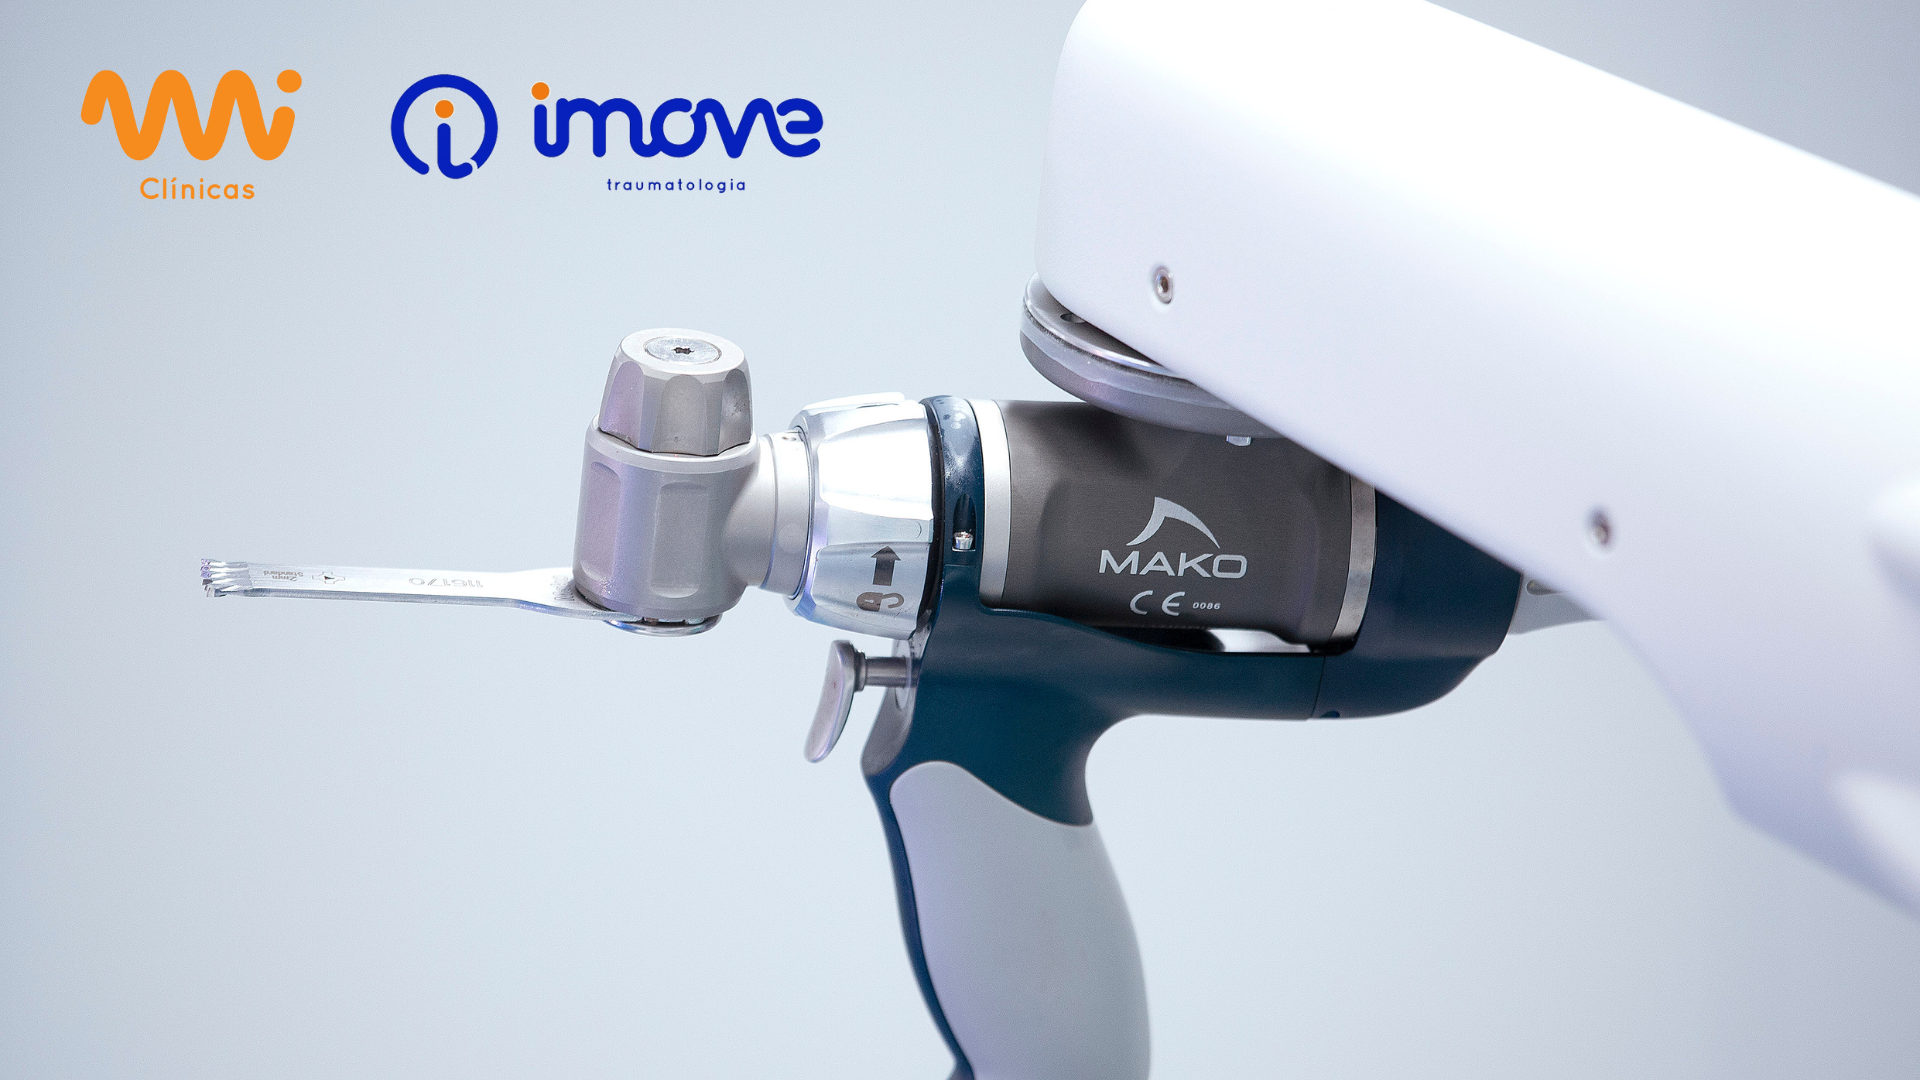 Discover the MAKO robotic technology to operate knee prostheses